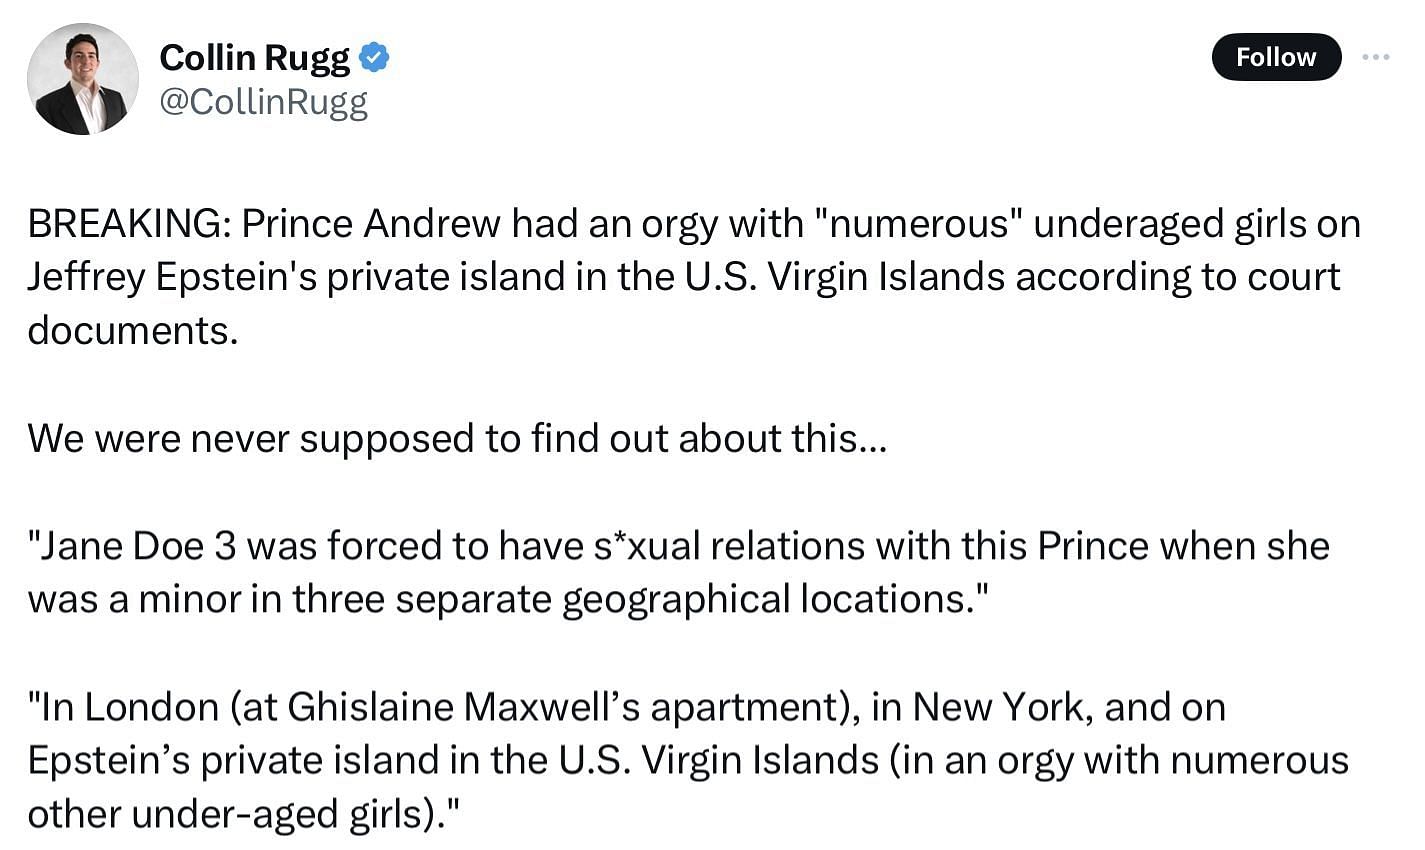 The prince allegedly accused of having s*x with underaged girls. (Image via @CollinRugg/X)